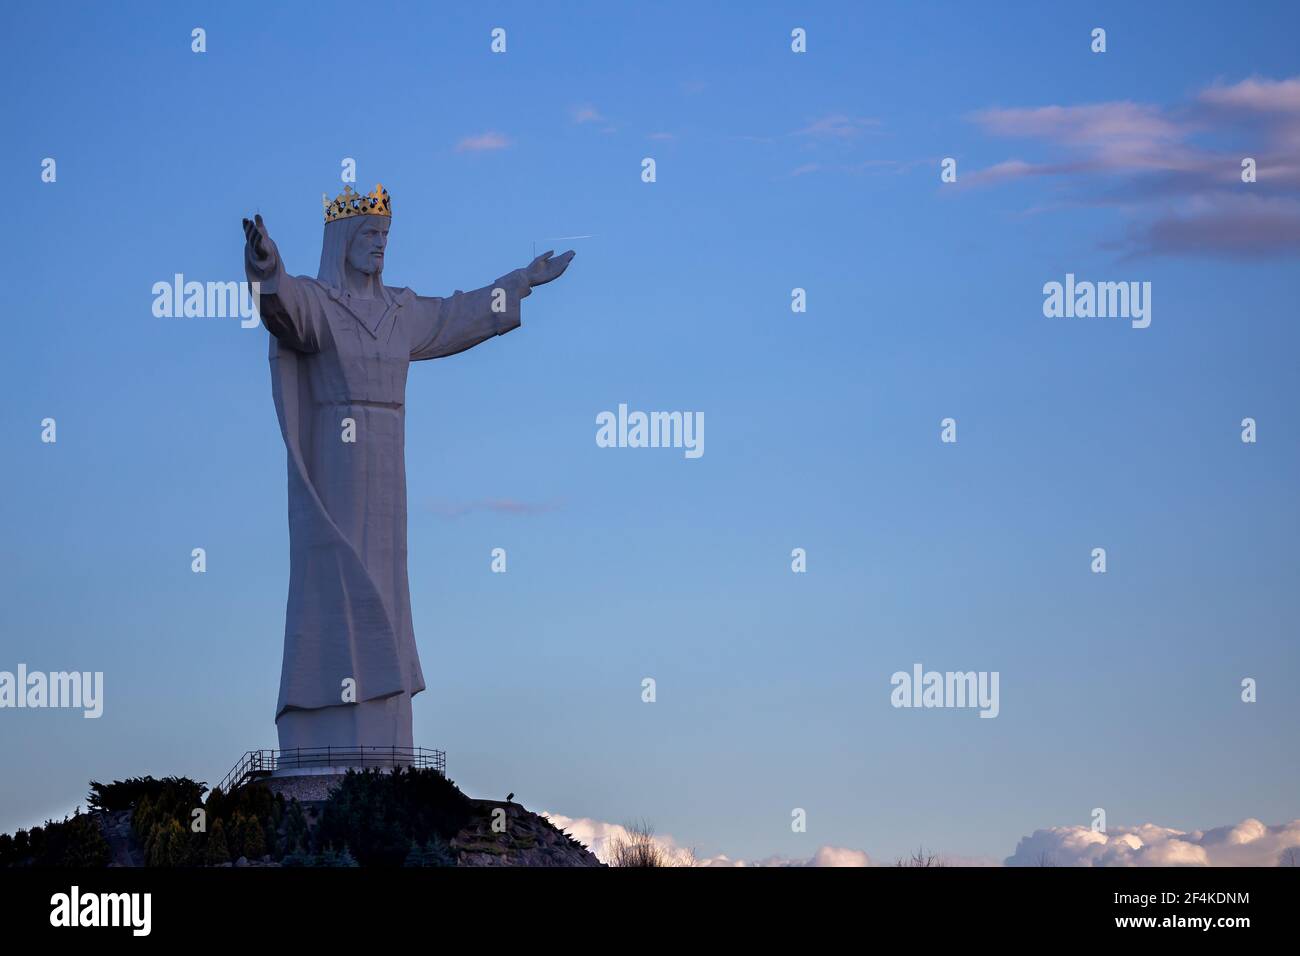 The world's tallest statue of Jesus Christ, Swiebodzin, Poland. Deep blue skies in the background. Made in the late afternoon on a sunny day. Stock Photo